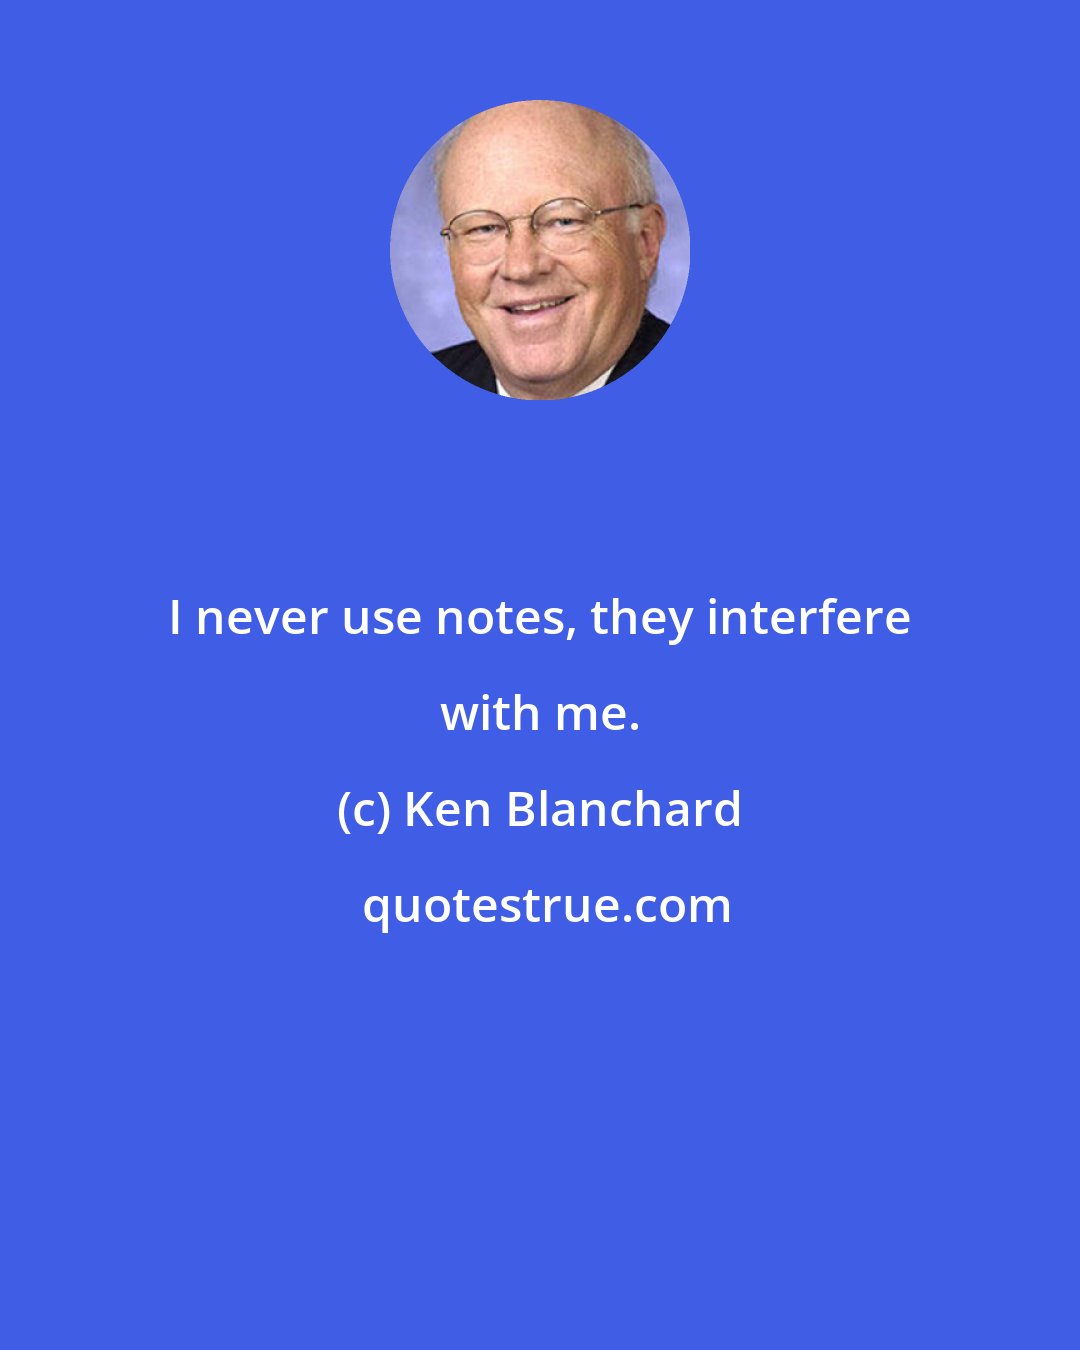 Ken Blanchard: I never use notes, they interfere with me.